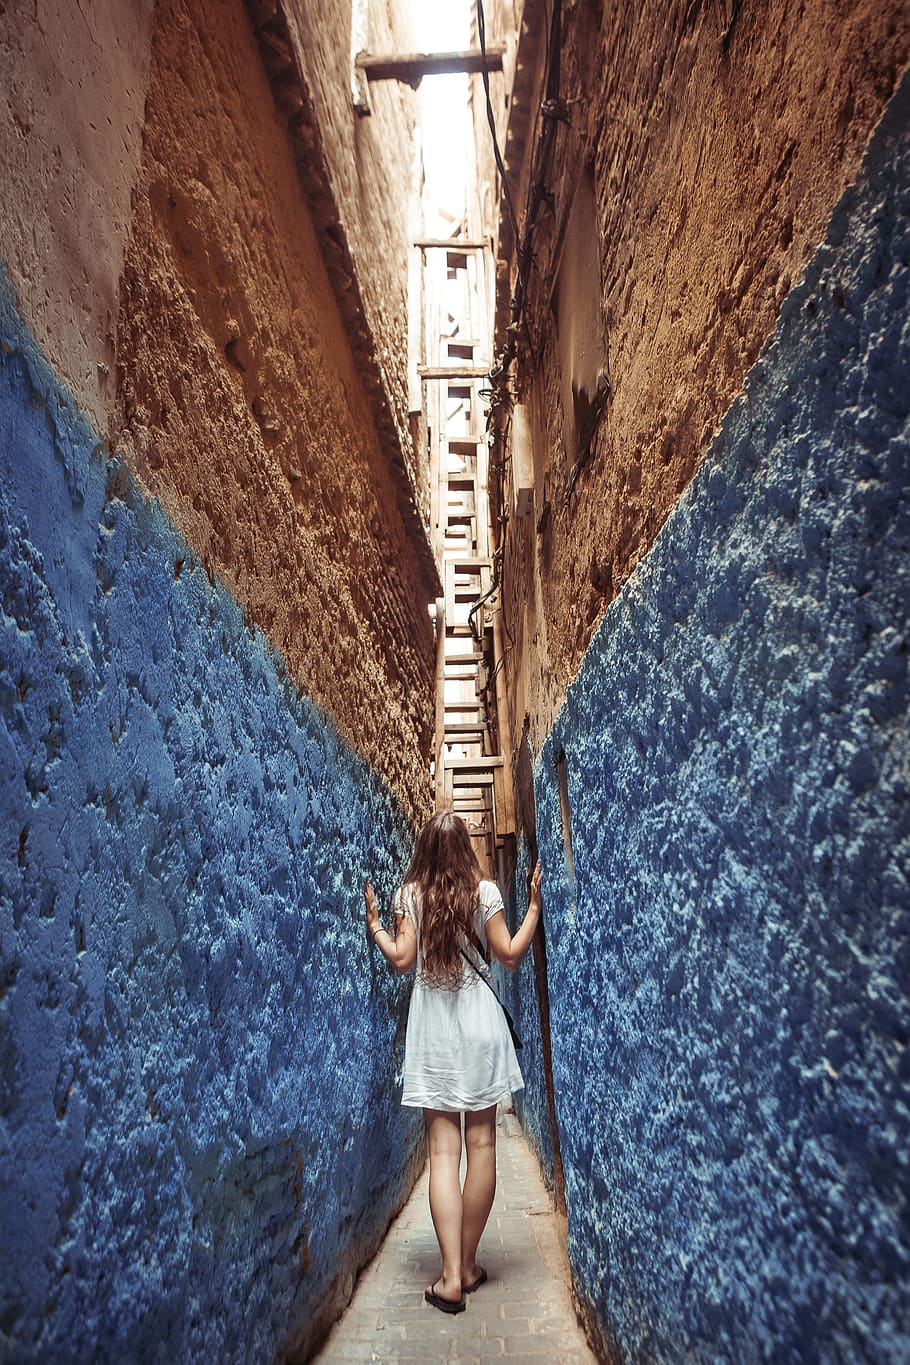 morocco, fes, alley, alleyway, trip, travel, girl, arabic, one person